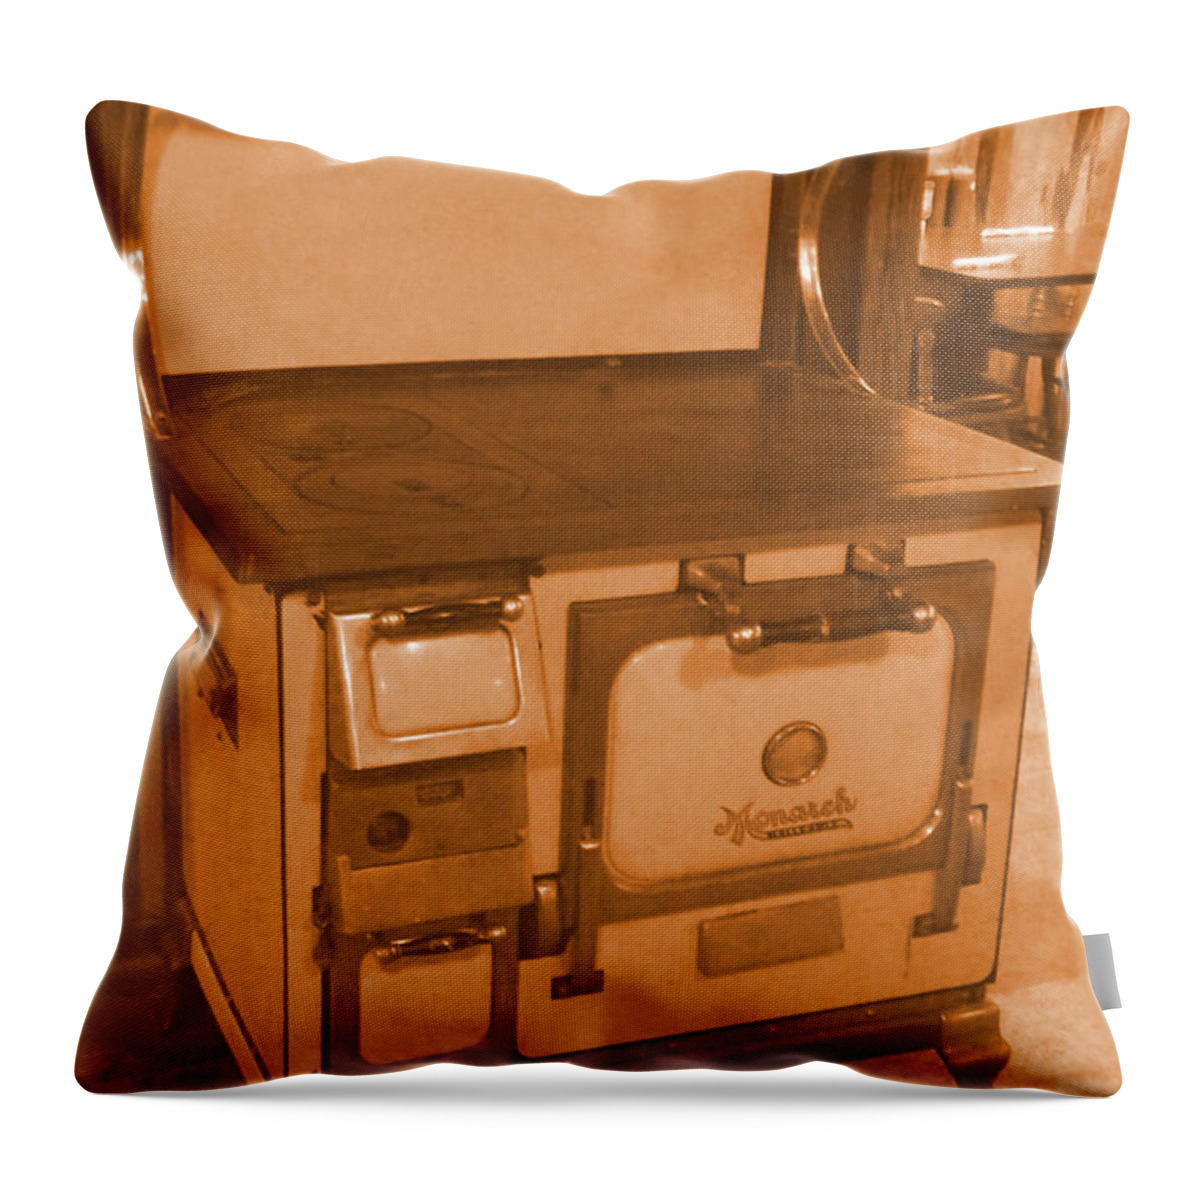 Cooking Throw Pillow featuring the photograph The Monarch Cook Stove in Sepia by Mike and Sharon Mathews